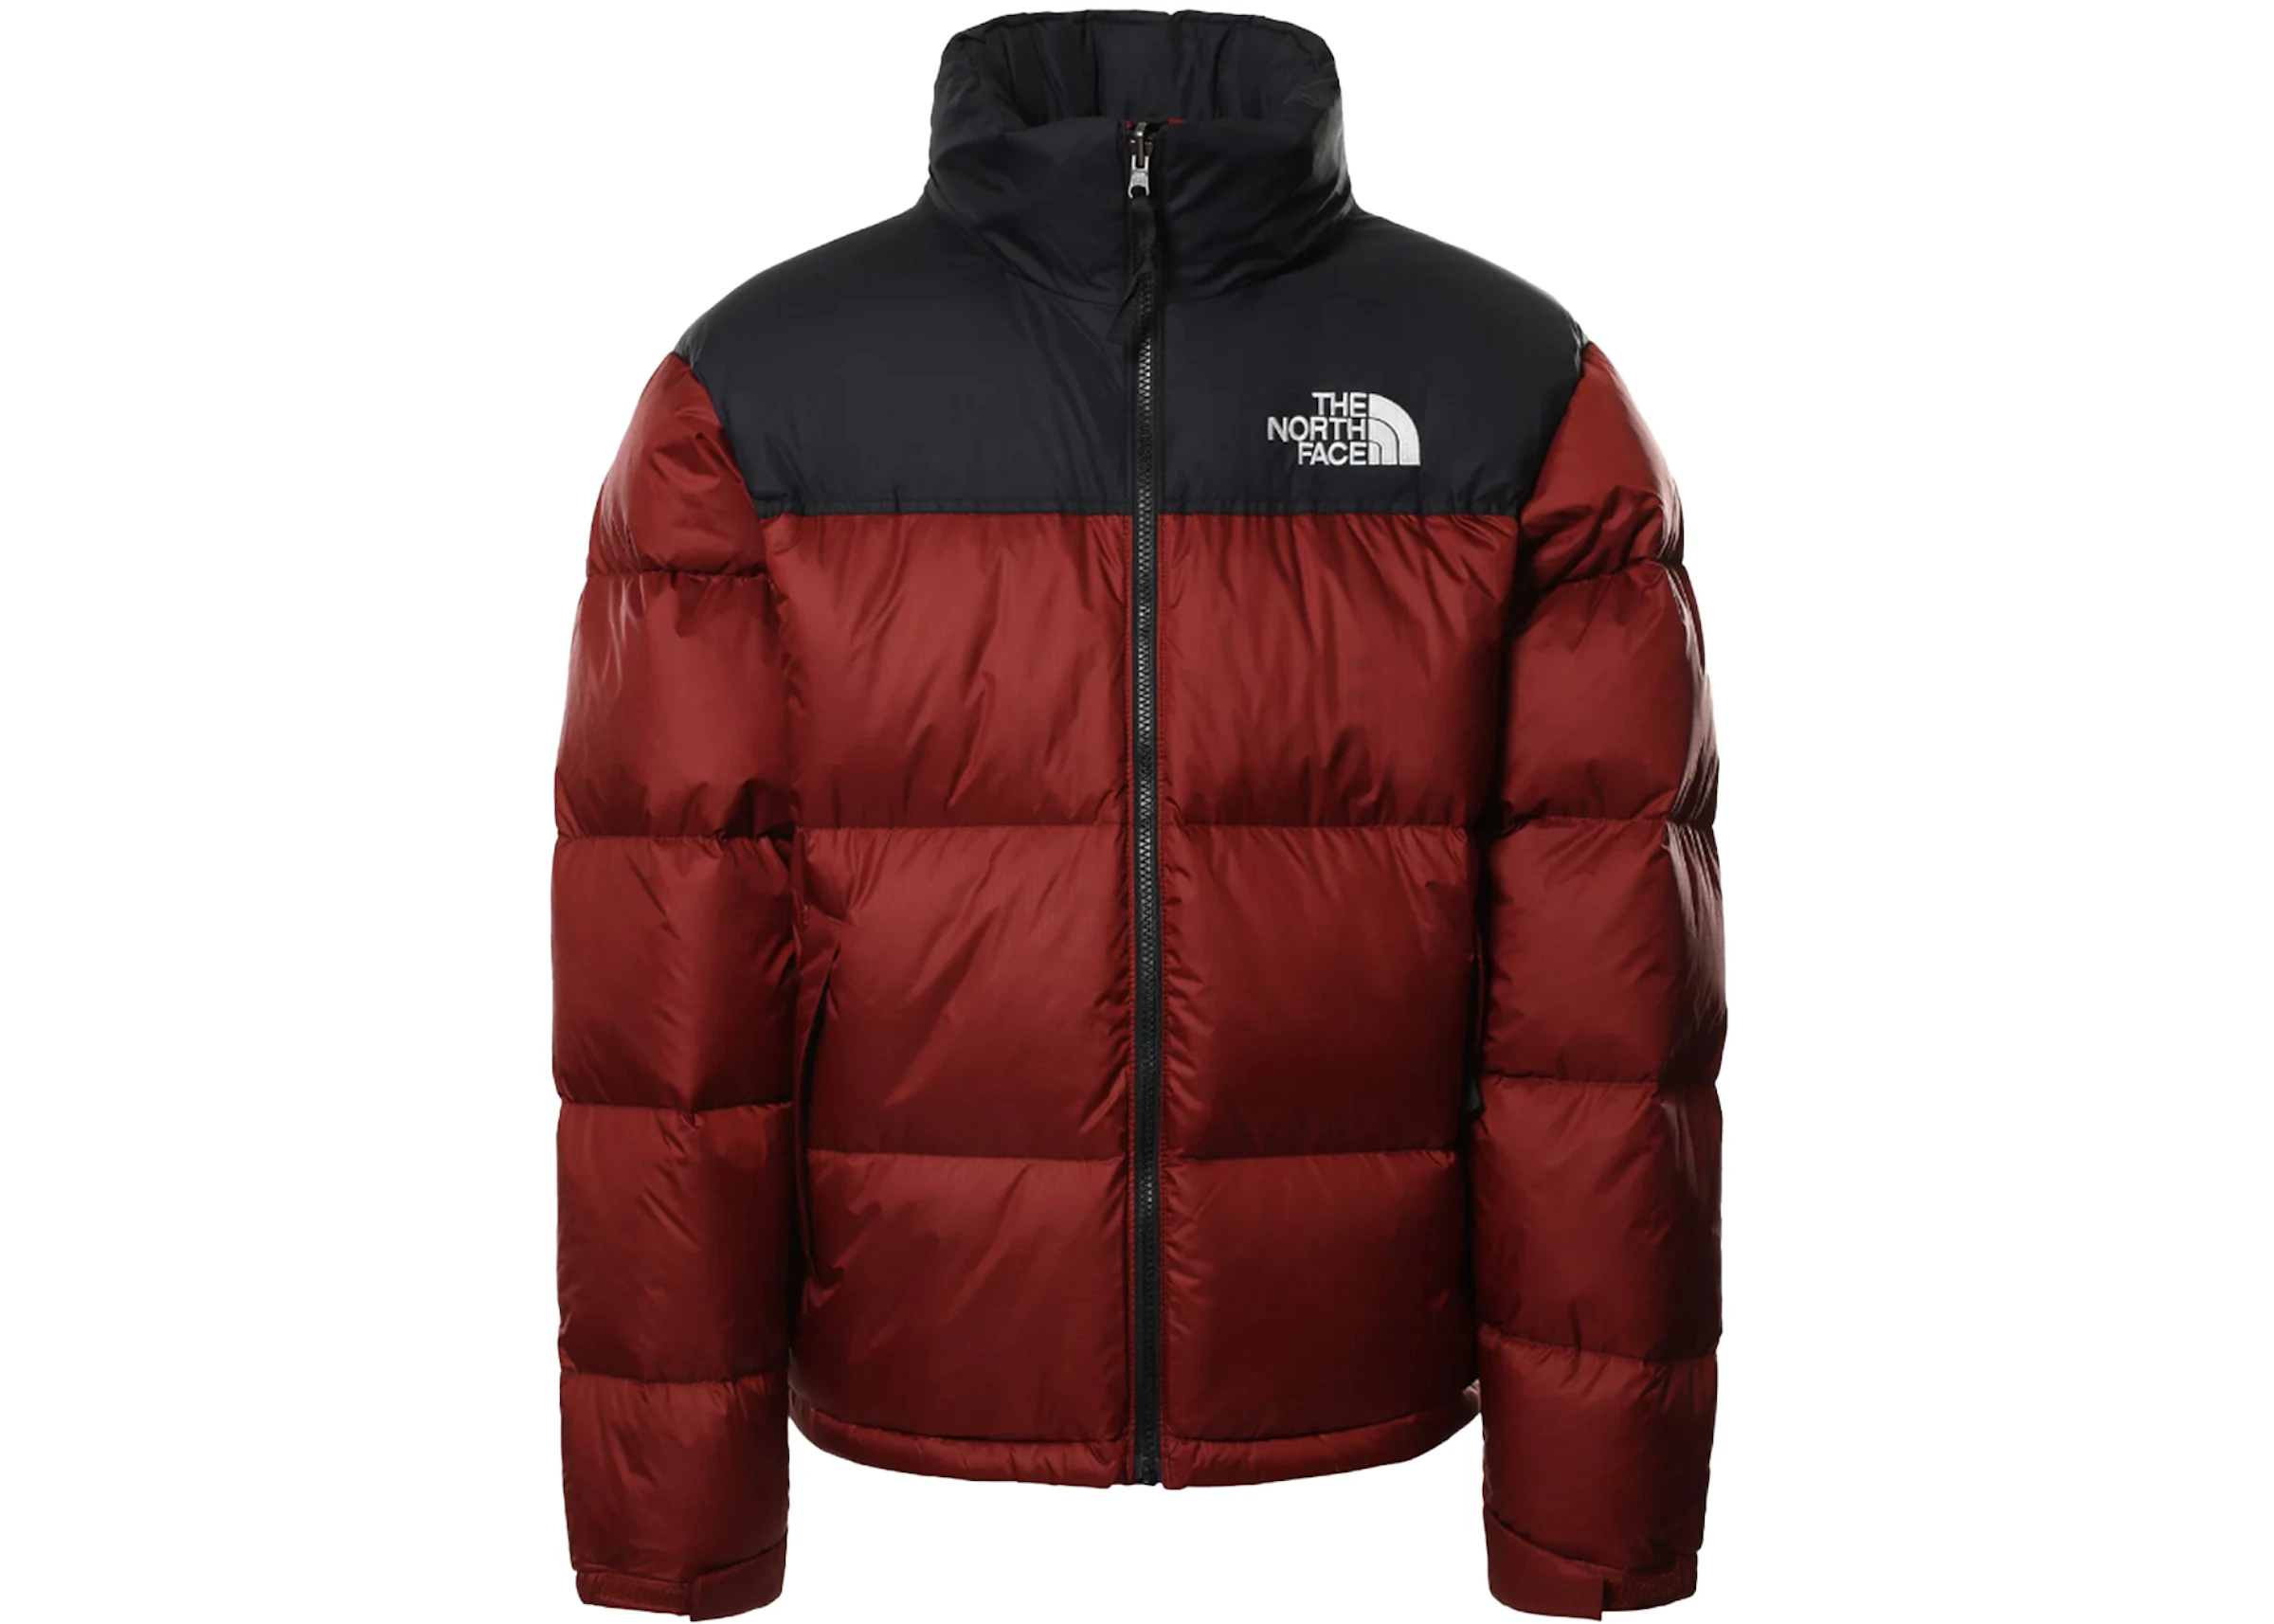 The North Face Jackets, Shirts More - StockX